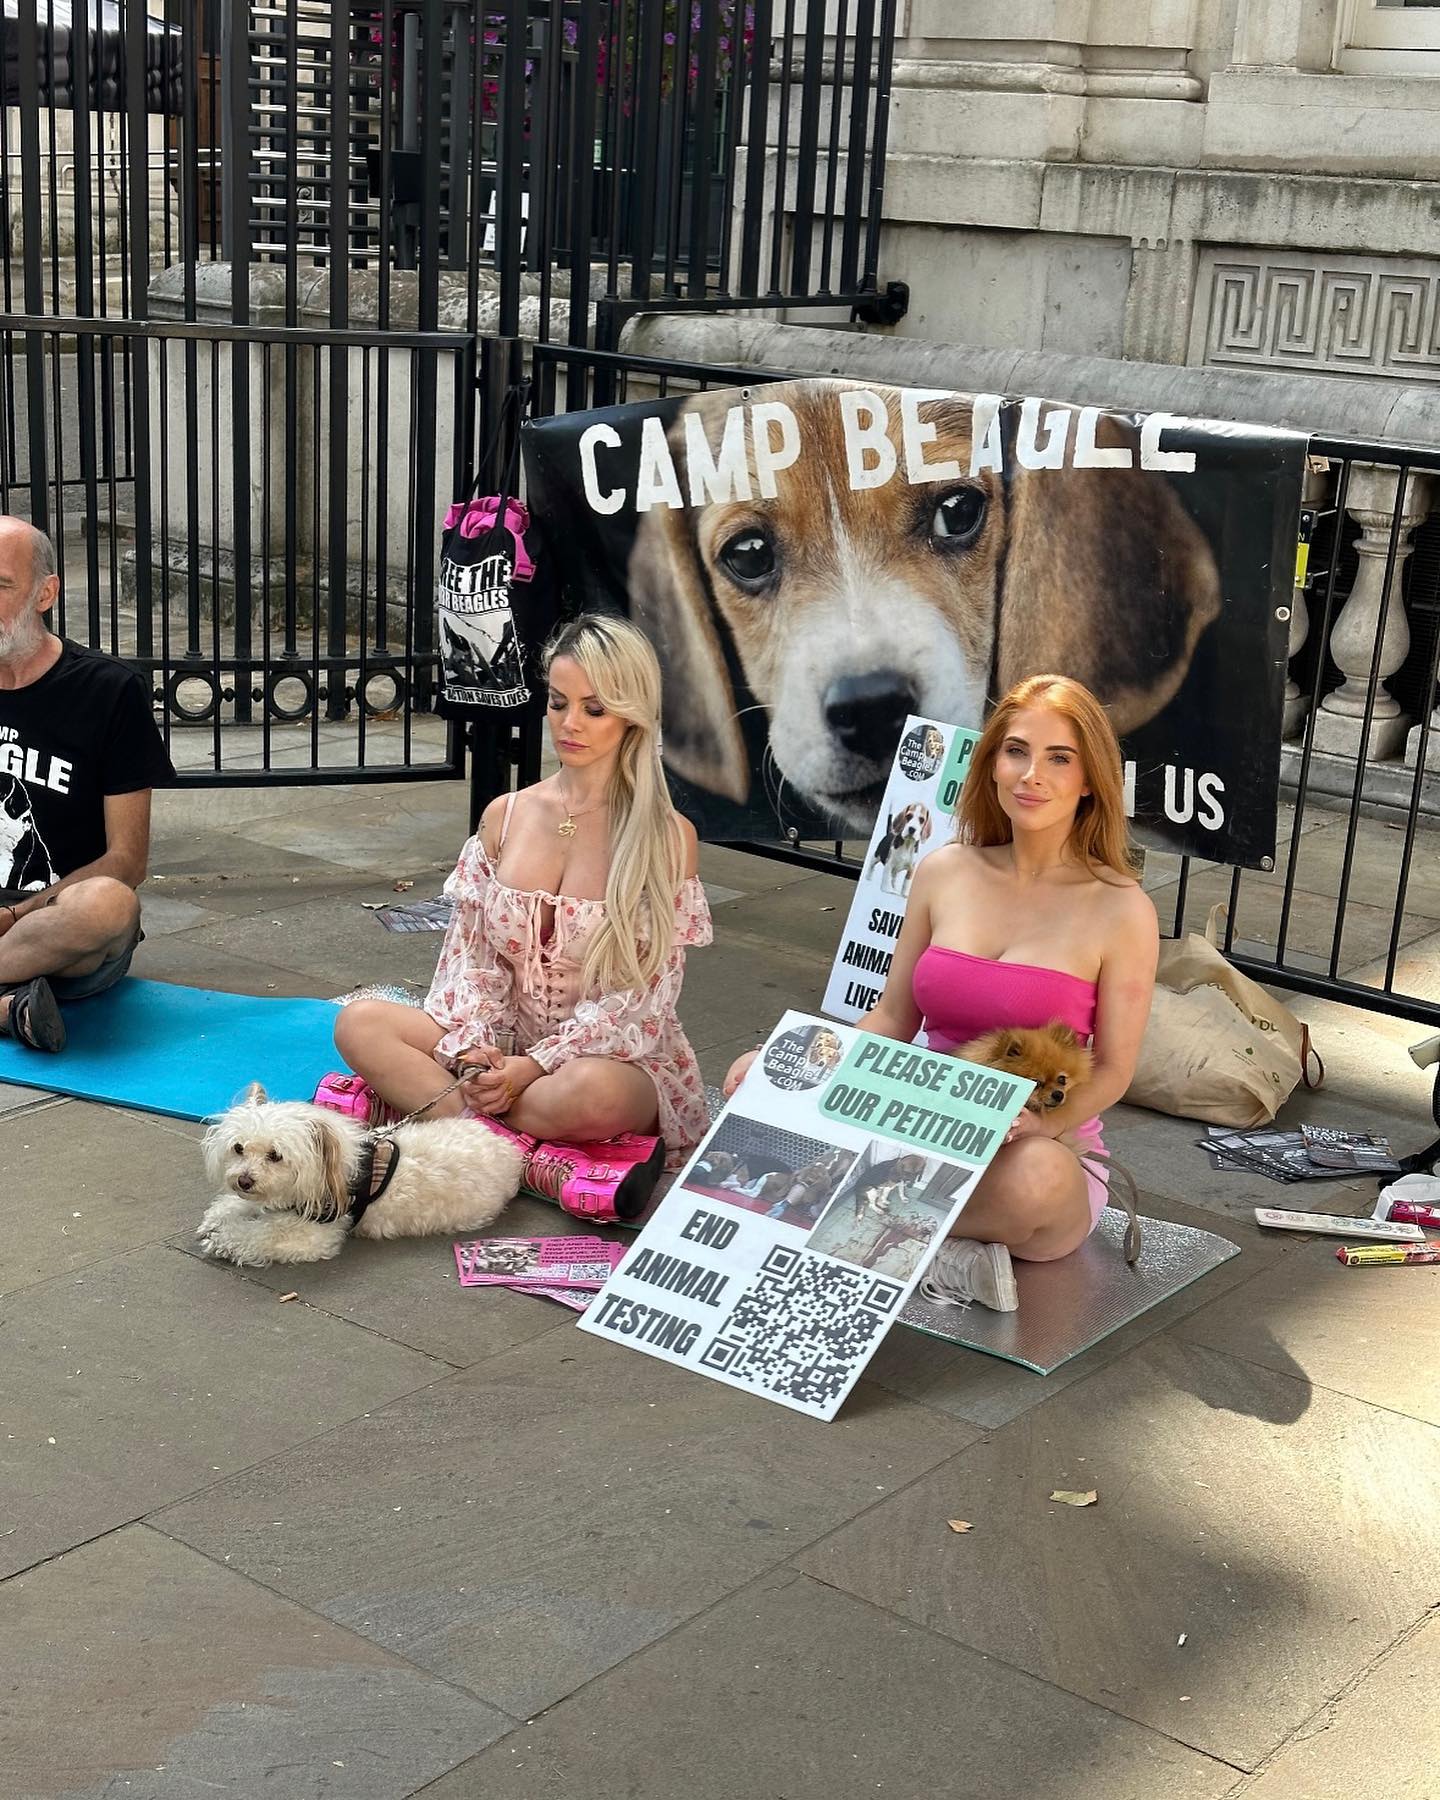 A brilliant day campaigning for Camp Beagle. It’s absolutely horrific and pure evil that these poor doggy’s are getting tested on. Please ban animal testing in the UK! Please sign the petition. https://petition.parliament.uk/petitions/633591?fbclid=PAAaa4vqGAtVtC2qwBf4ldOwM3vNFC1txRaHZ604am7tWGv_NTBeivXS3eT8c_aem_AQ9Y45SViFhA39QLELfTa6Z1LpycZ02ri2QekR-l2xJei1WIbfEMaqC-Mvdv558OILE